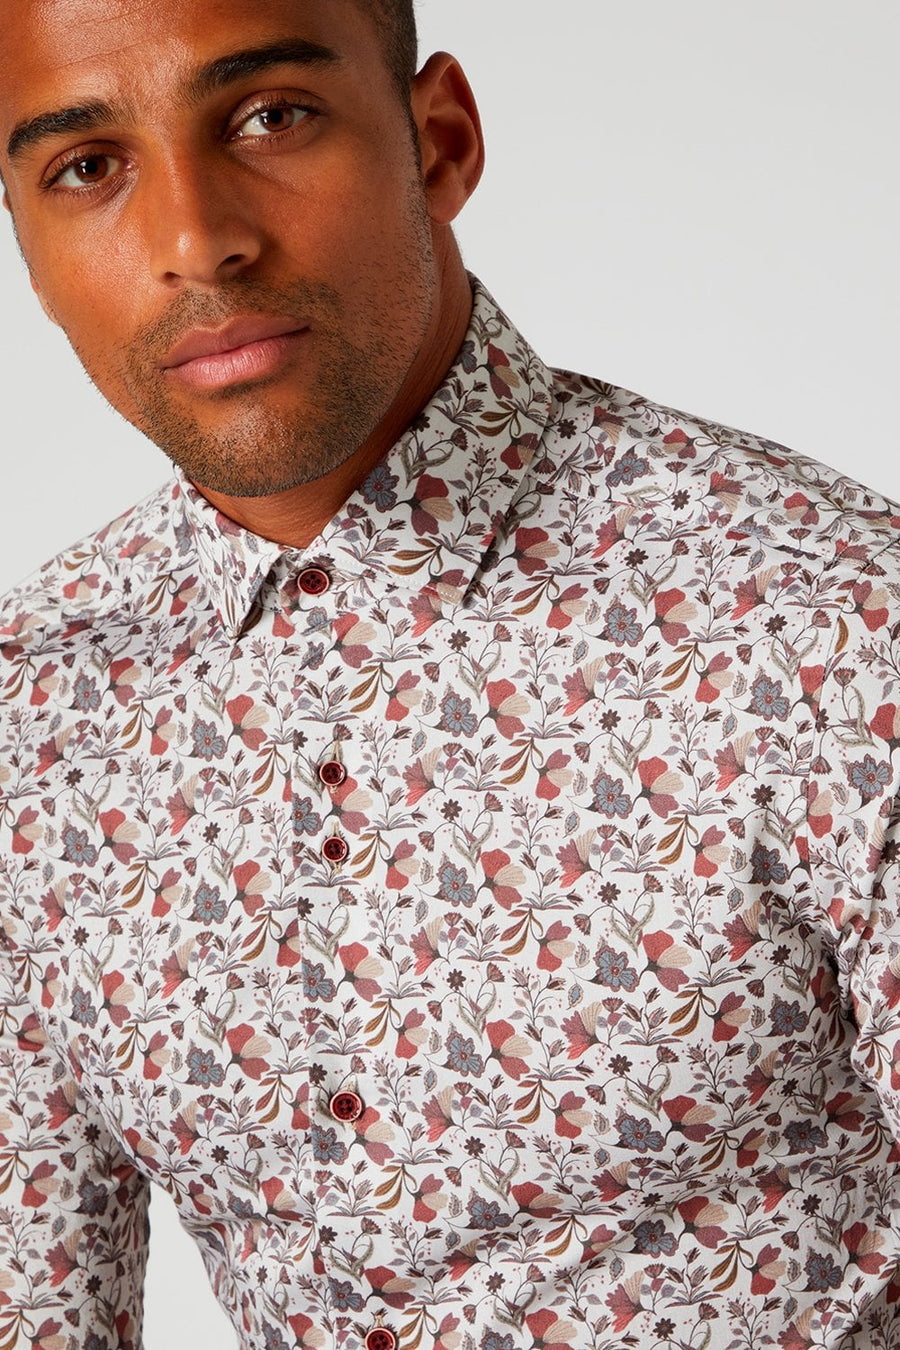 Buy the Remus Uomo 13007 Shirt in Stone at Intro. Spend £50 for free UK delivery. Official stockists. We ship worldwide.